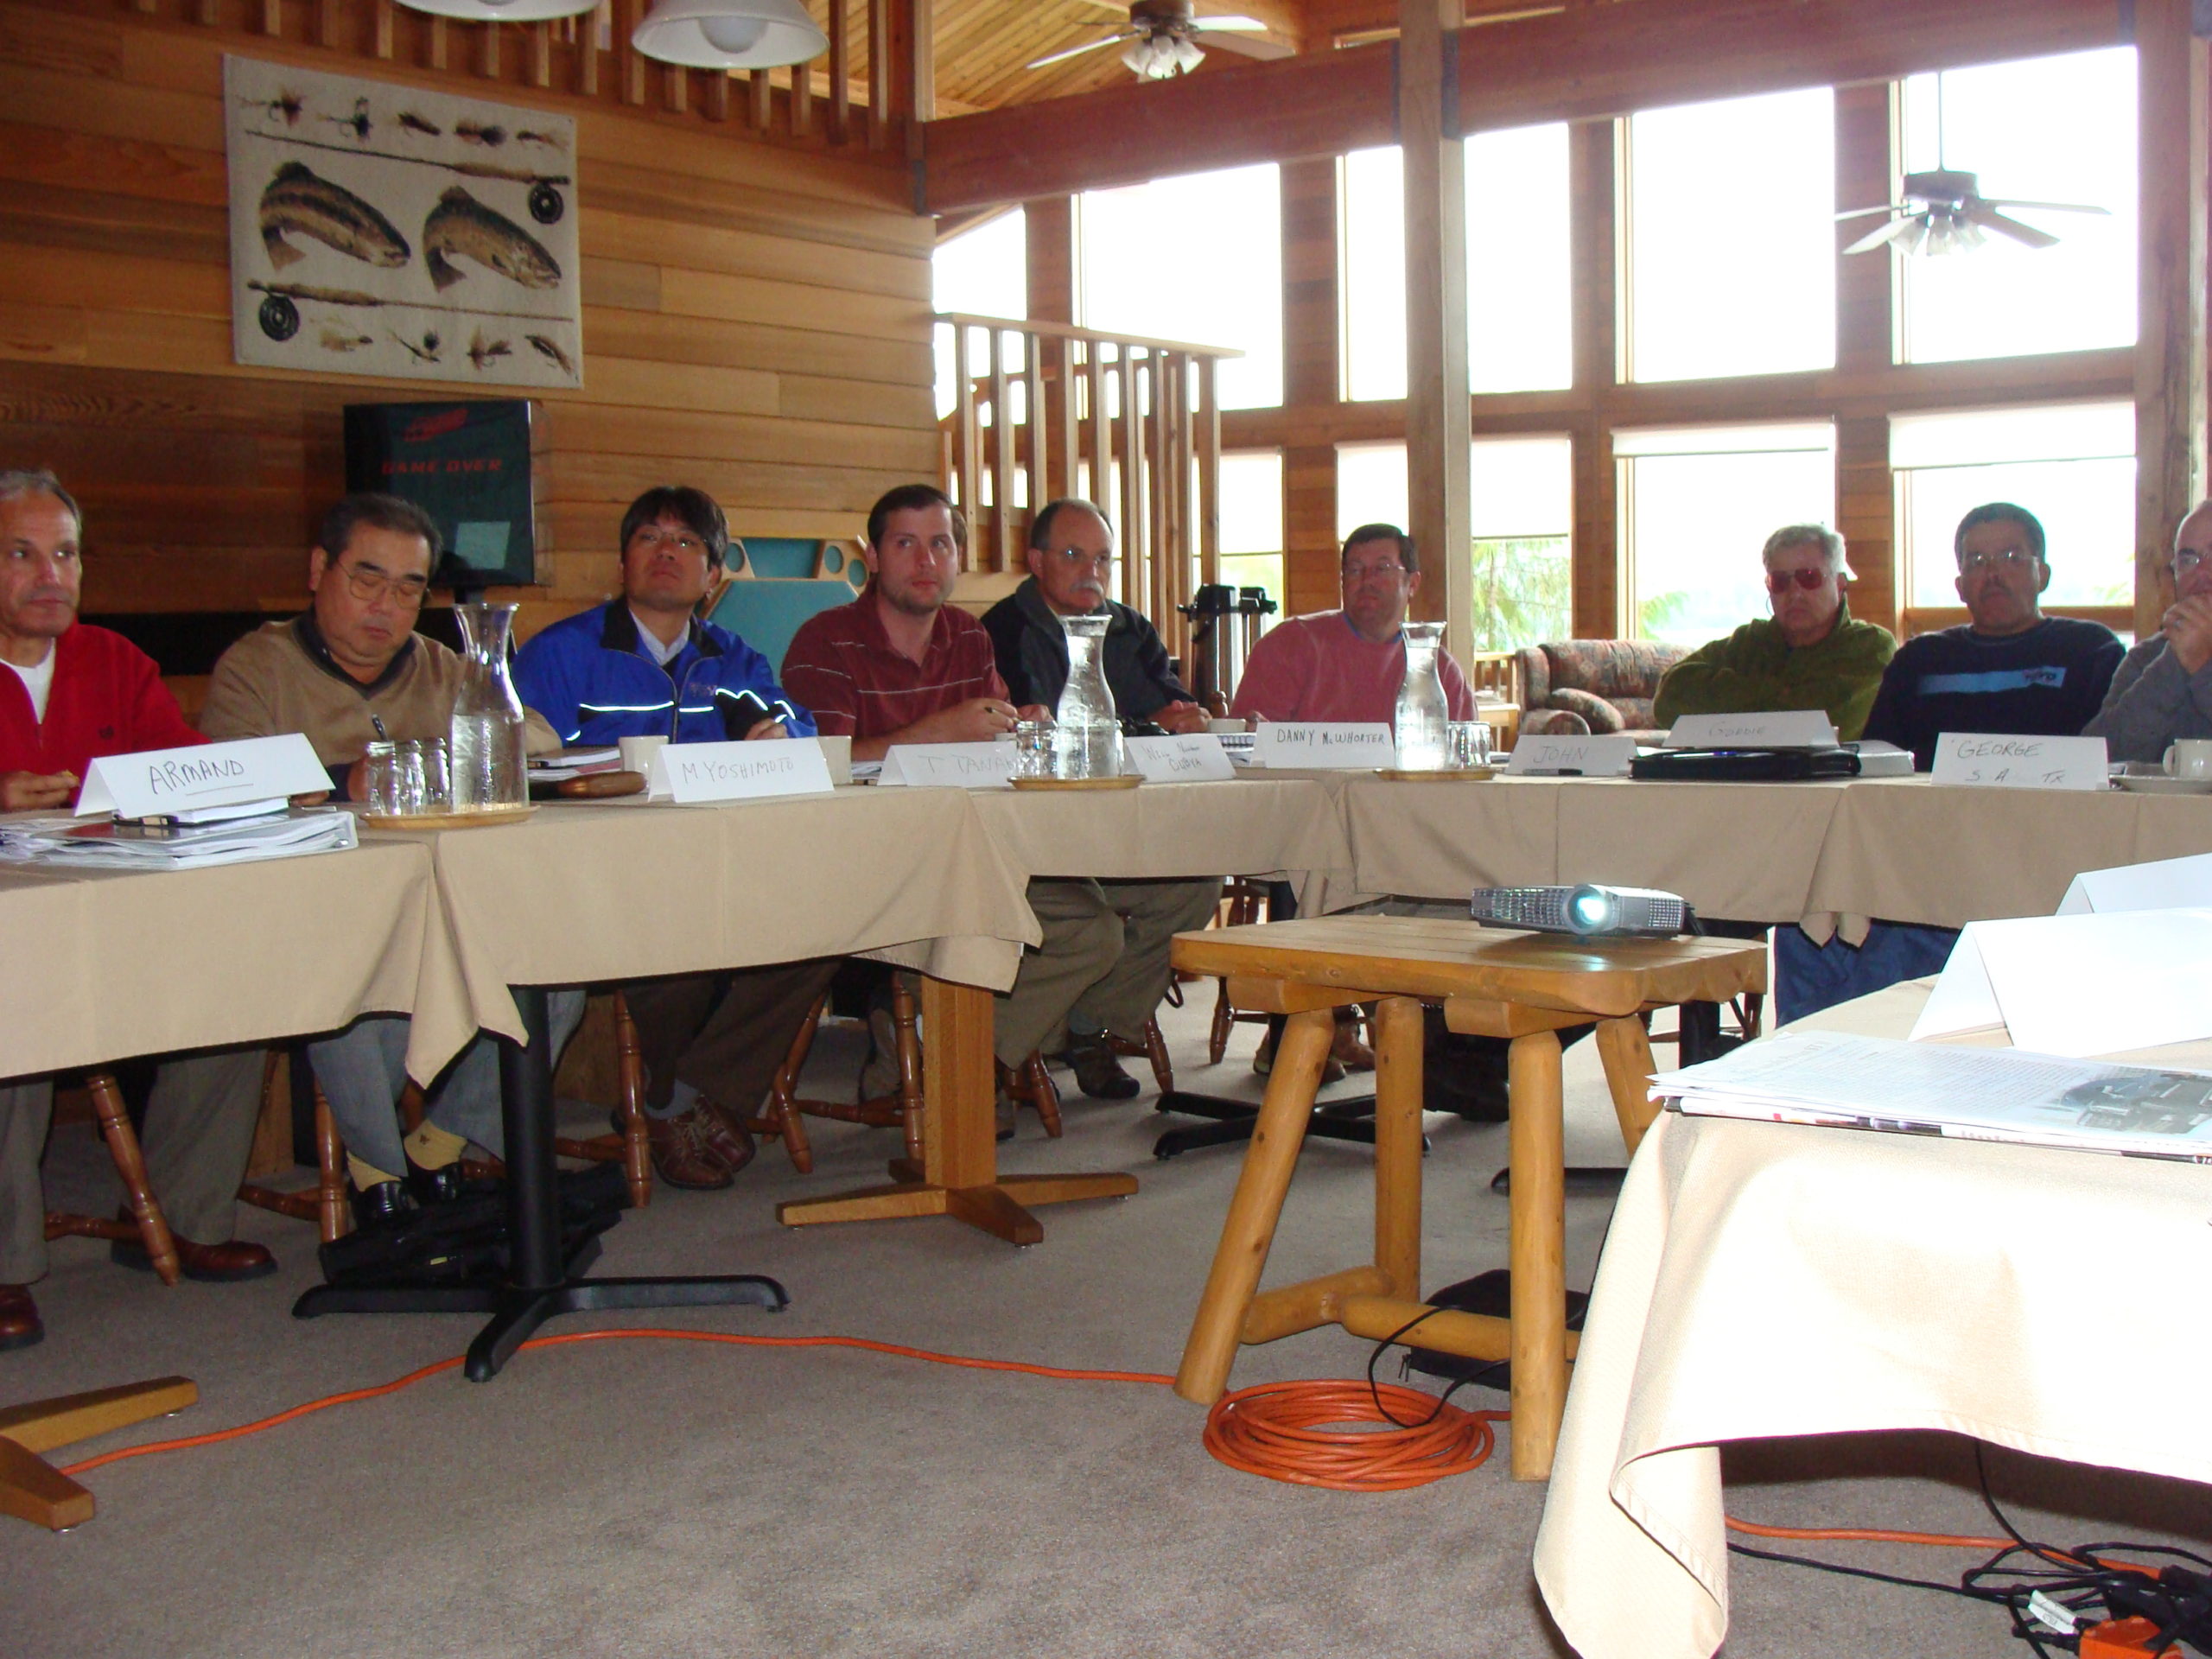 Toyo Tire corporate group meets at The Lodge at Whale Pass